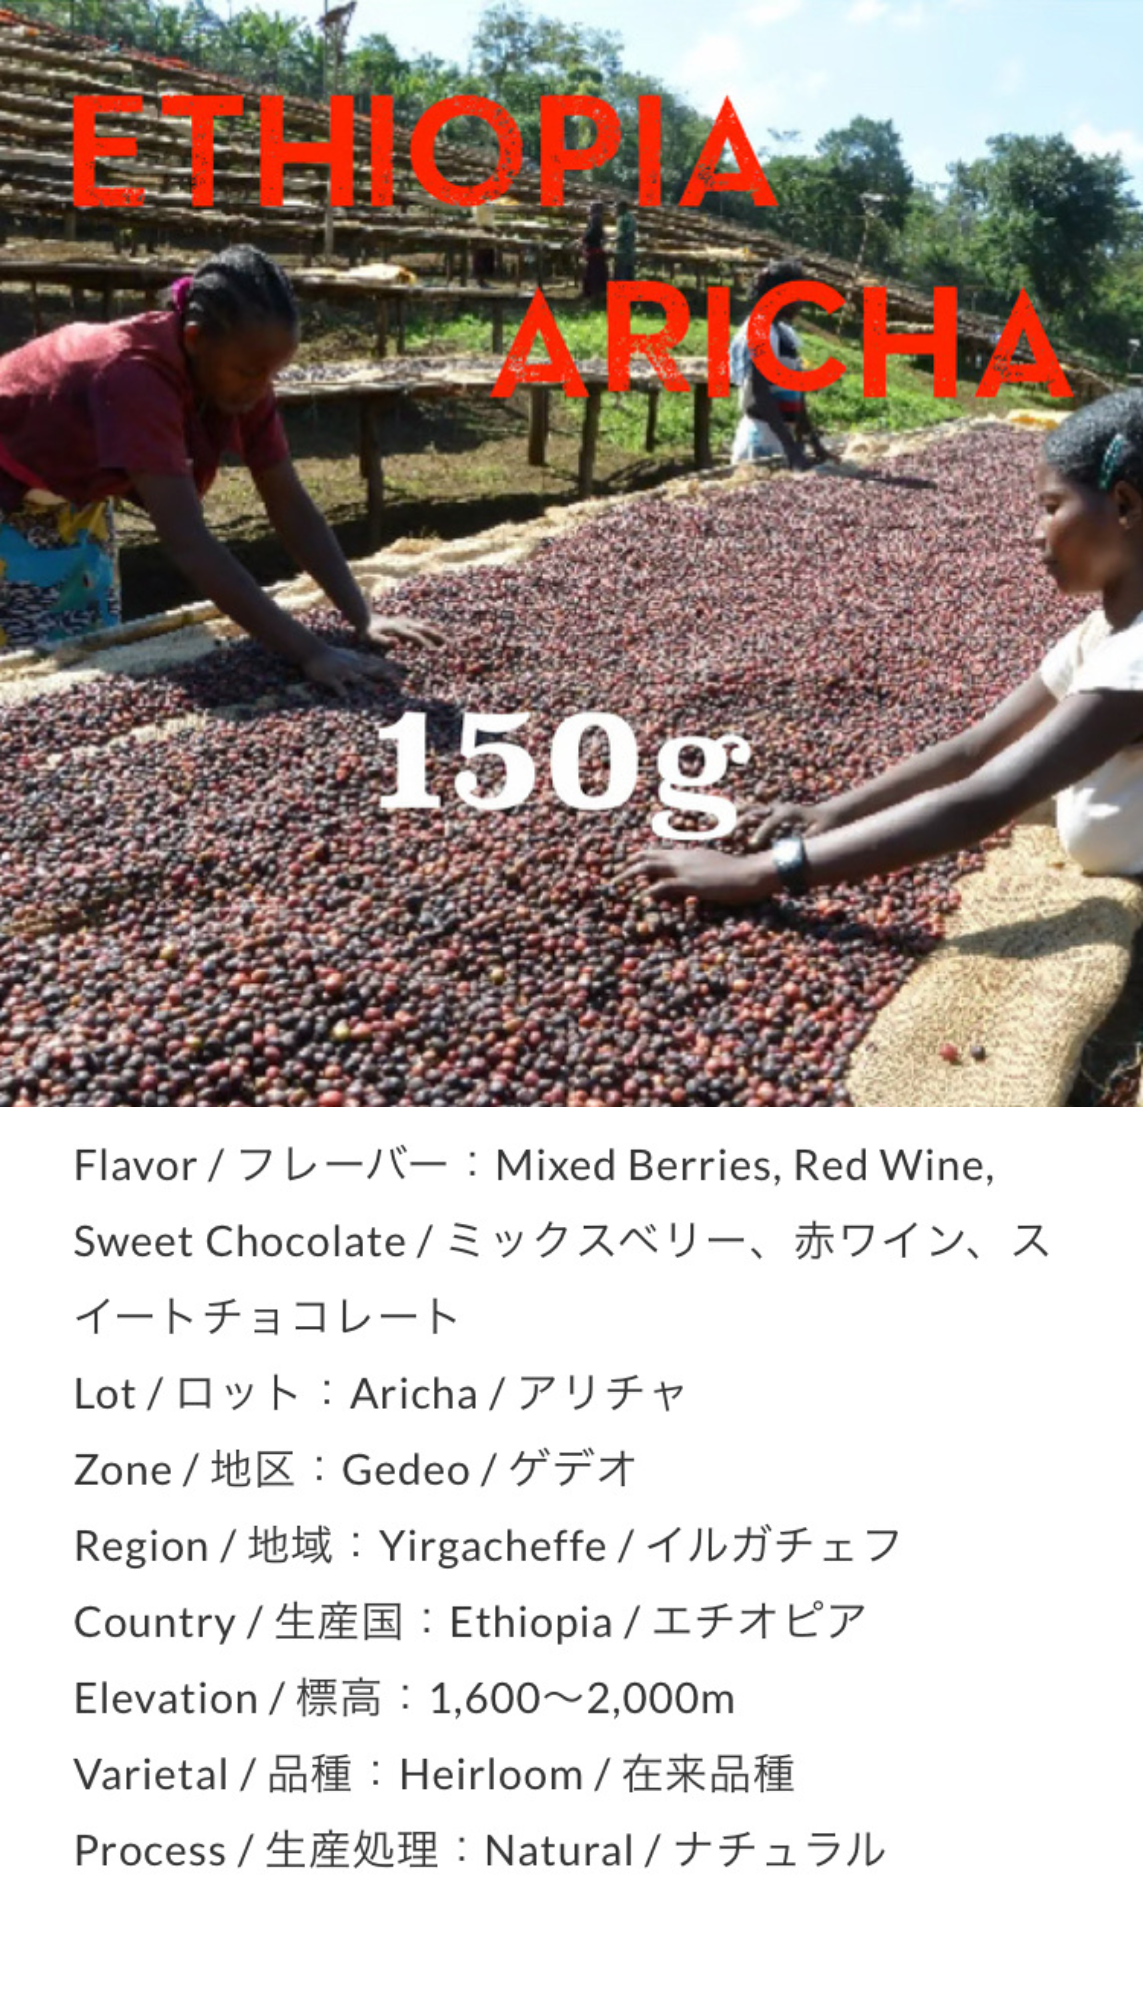 Ethiopia ARICHA Natural by Unlimited Coffee Roasters (東京)